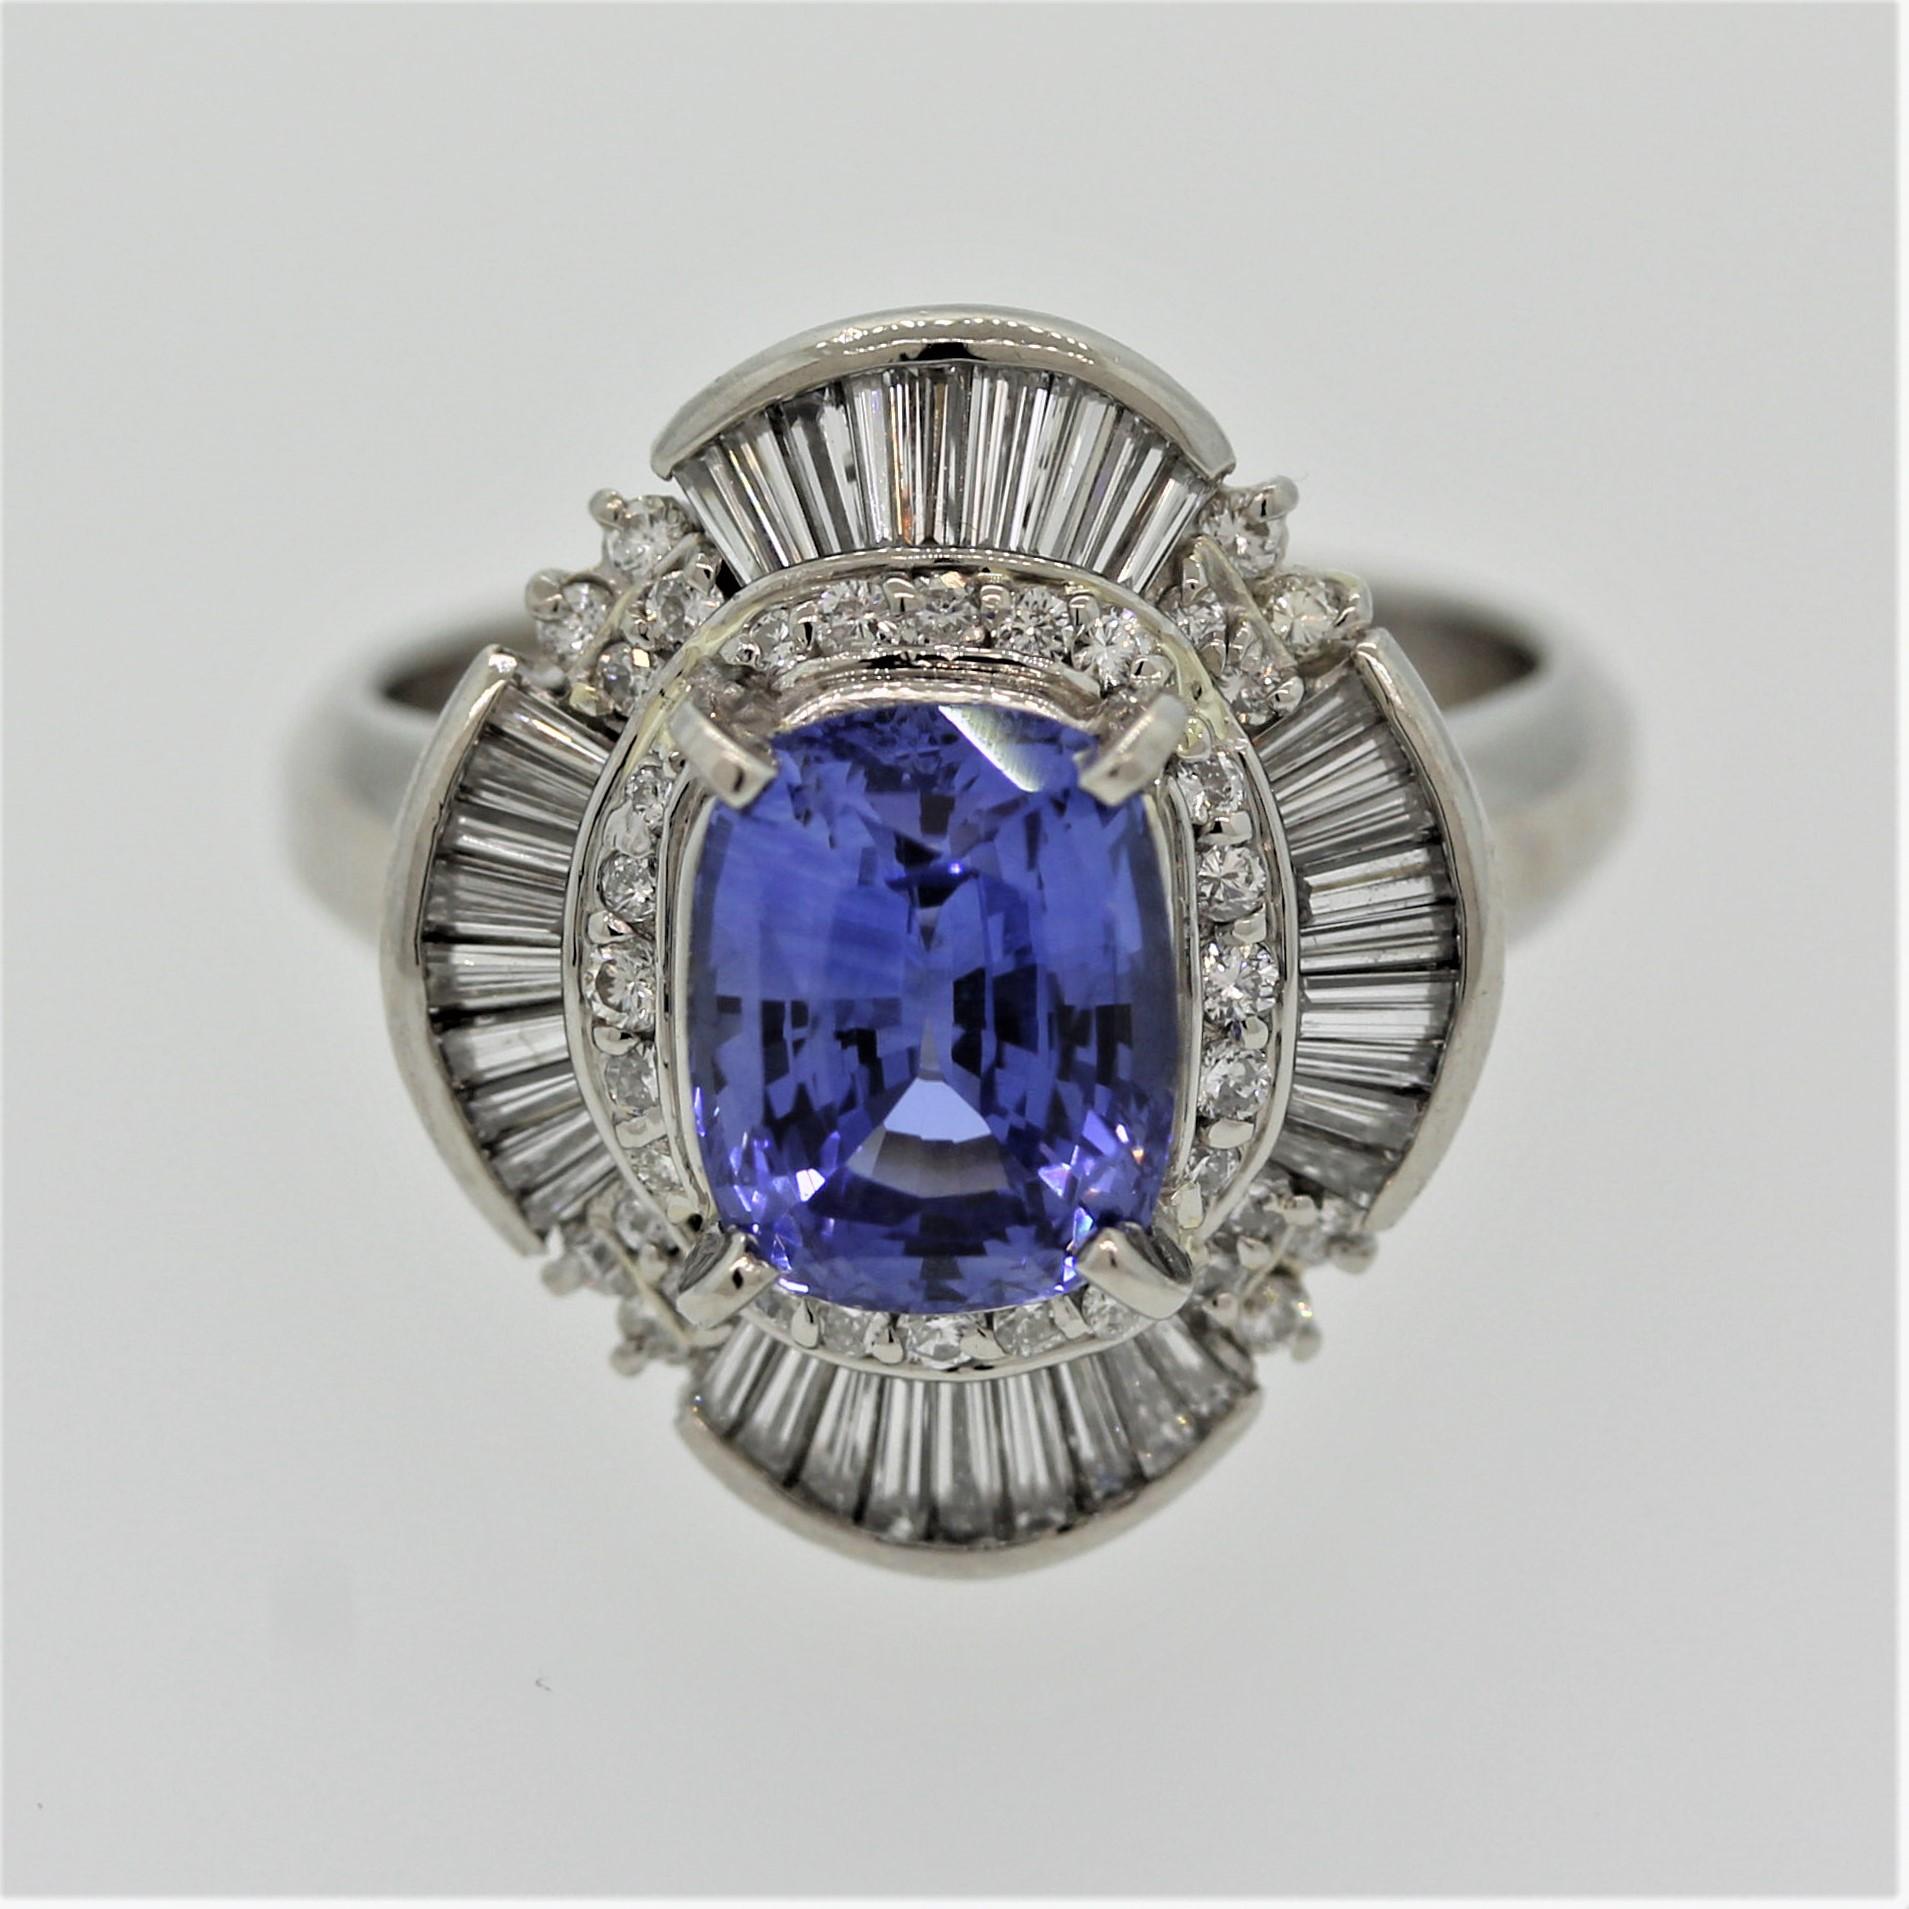 A wonderfully bright and lively sapphire takes center stage. It weighs 2.60 carats and has a clean brilliant blue color typical of fine stones from Ceylon (Sri Lanka). It is accented by 0.82 carats of round brilliant and baguette cut diamonds in a